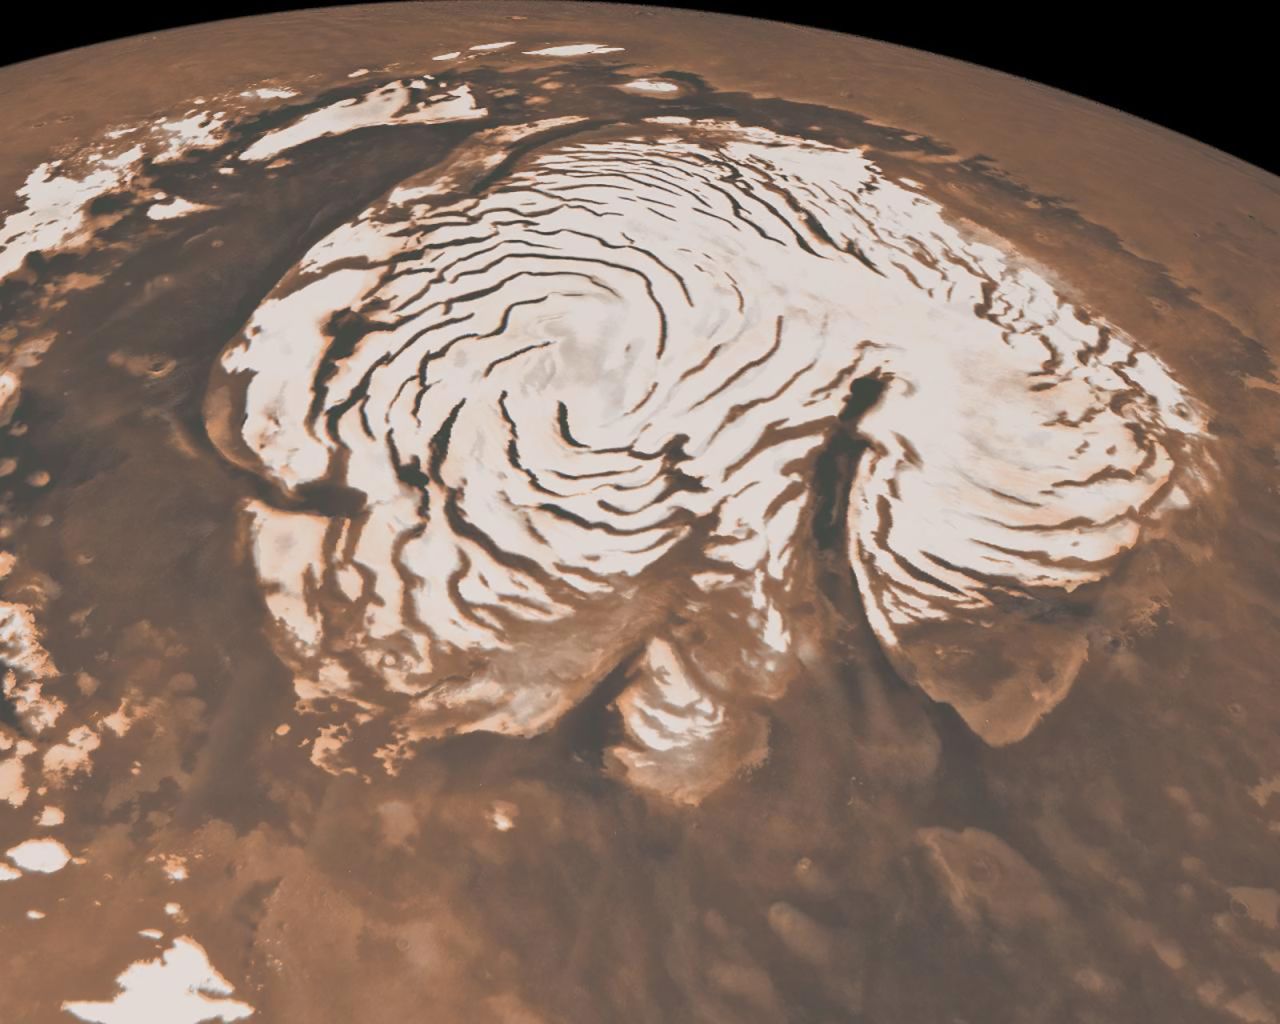 This image, combining data from two instruments aboard NASA's Mars Global Surveyor, depicts an orbital view of the north polar region of Mars. The ice-rich polar cap is 621 miles across, and the dark bands in are deep troughs. To the right of center, a large canyon, Chasma Boreale, almost bisects the ice cap. Chasma Boreale is about the length of the United States' famous Grand Canyon and up to 1.2 miles deep.